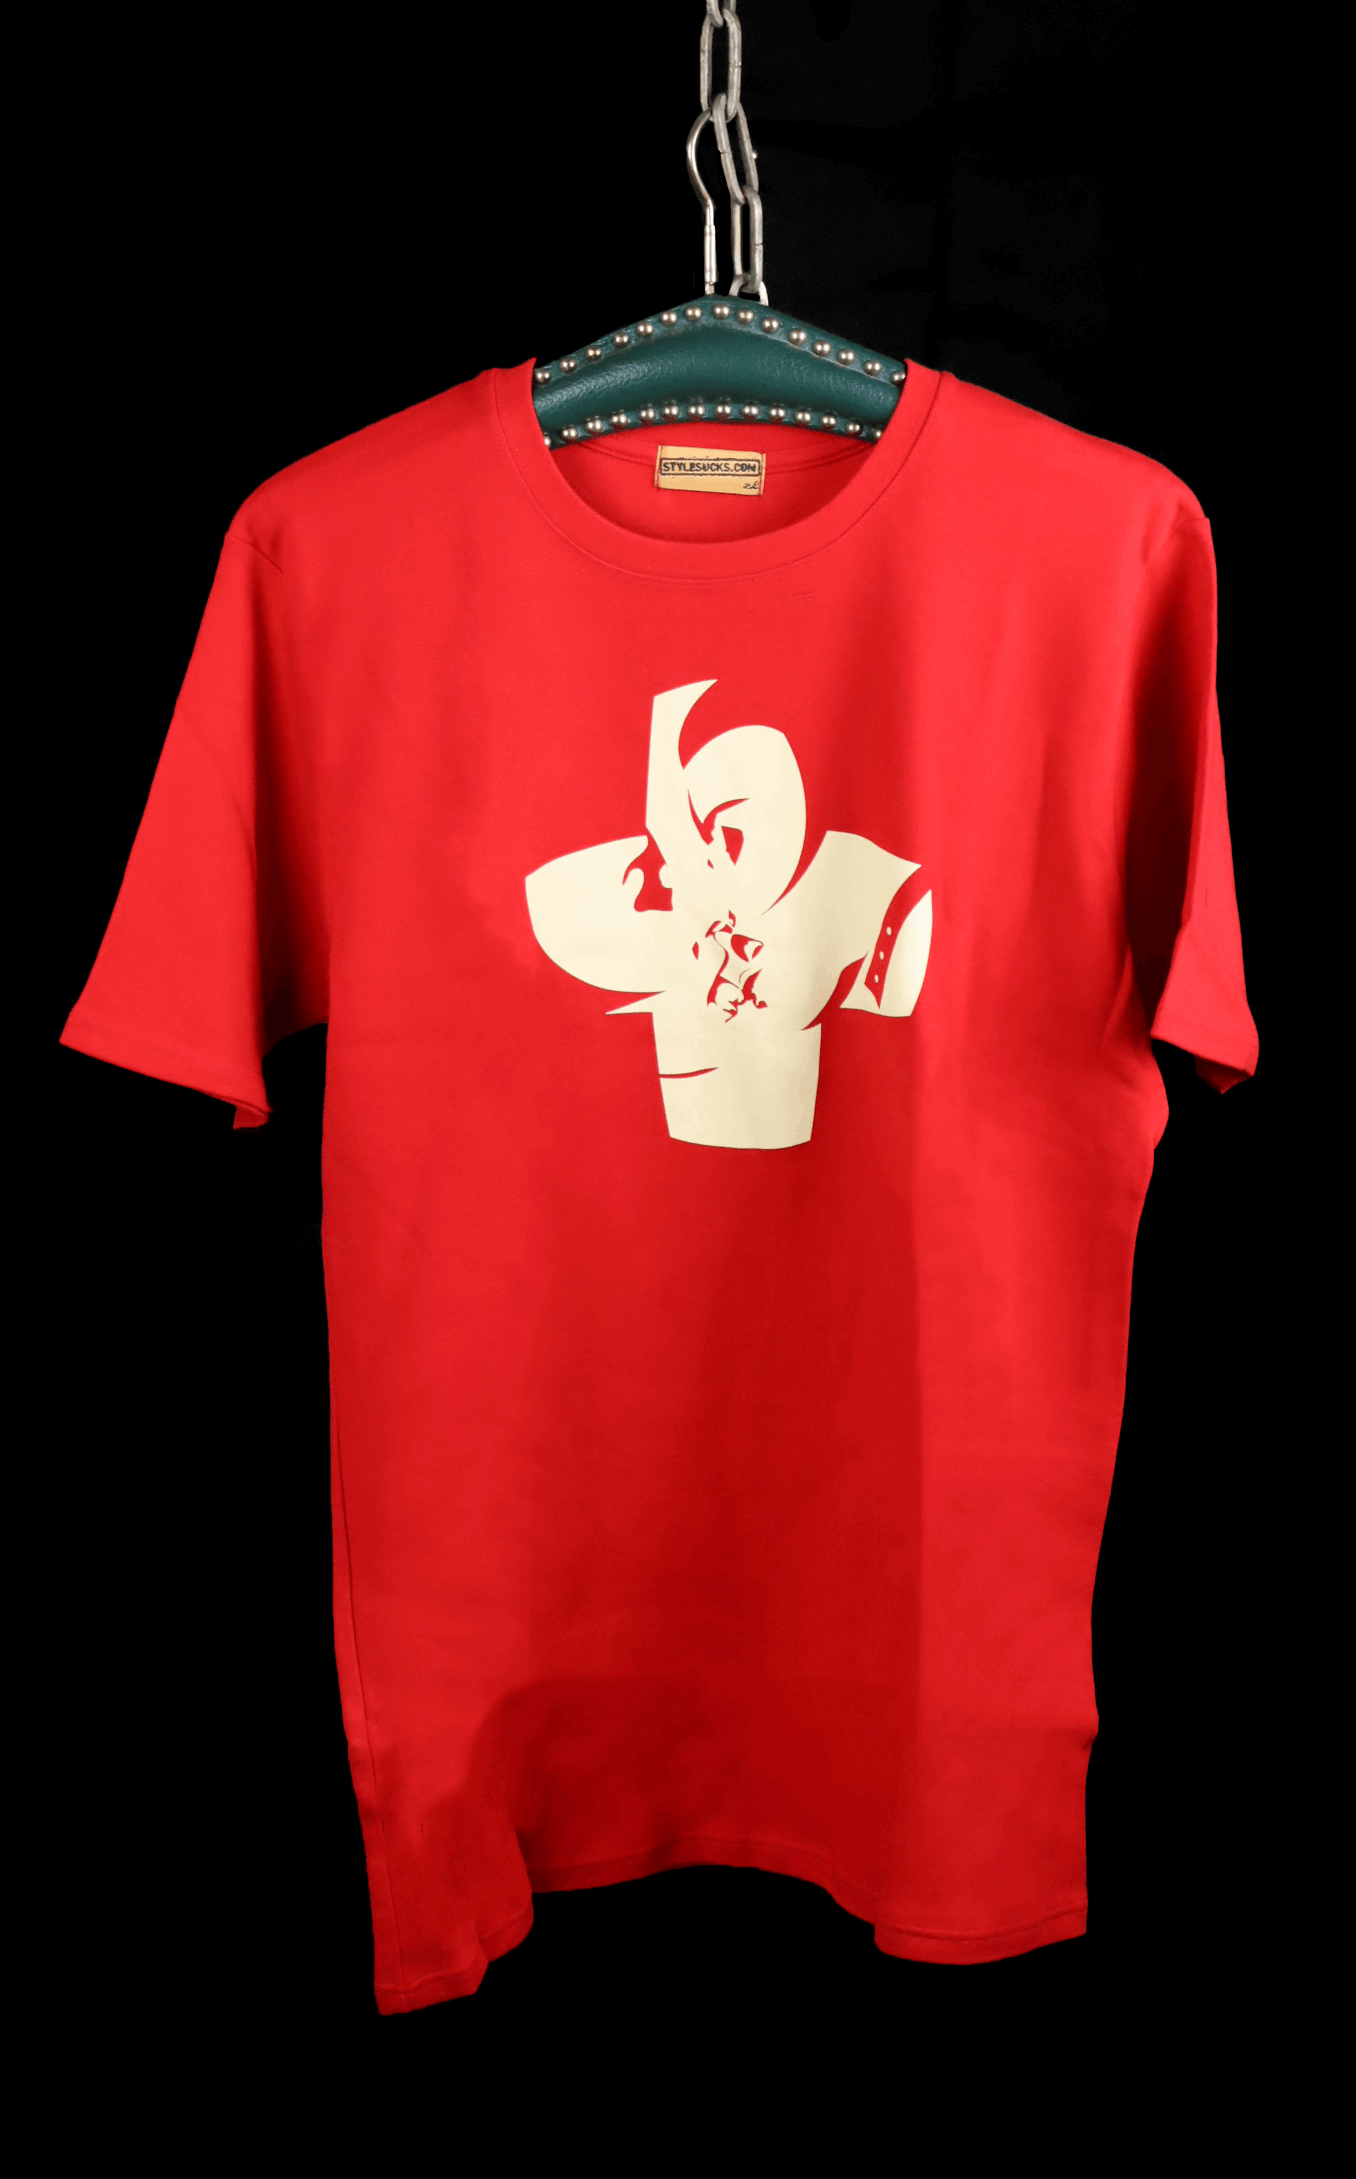 SALE share shirt red